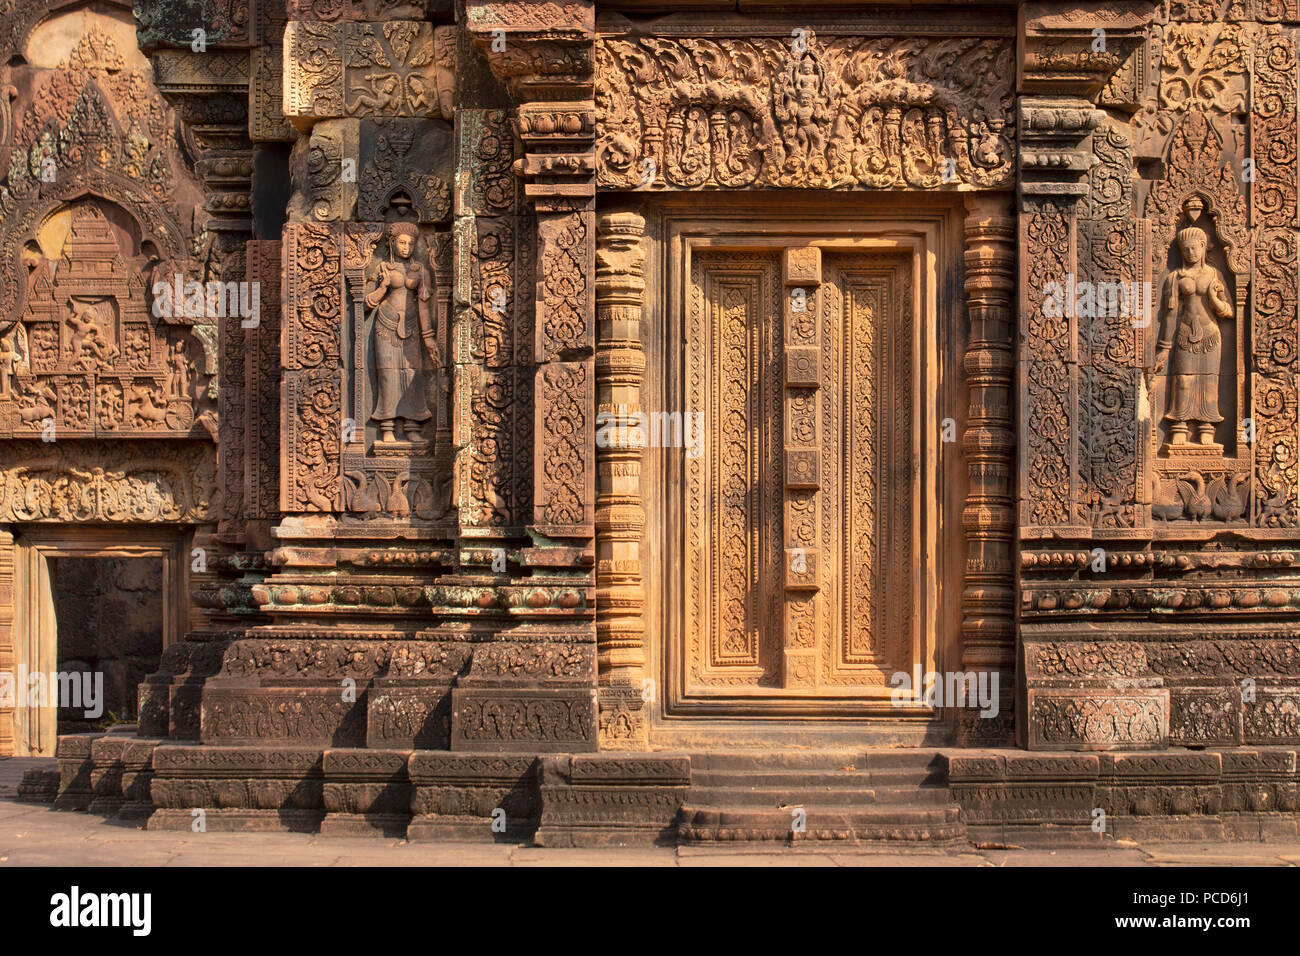 Detailed carving on the facade of a temple at Banteay Srei in Angkor, UNESCO World Heritage Site, Siem Reap, Cambodia, Indochina, Southeast Asia, Asia Stock Photo